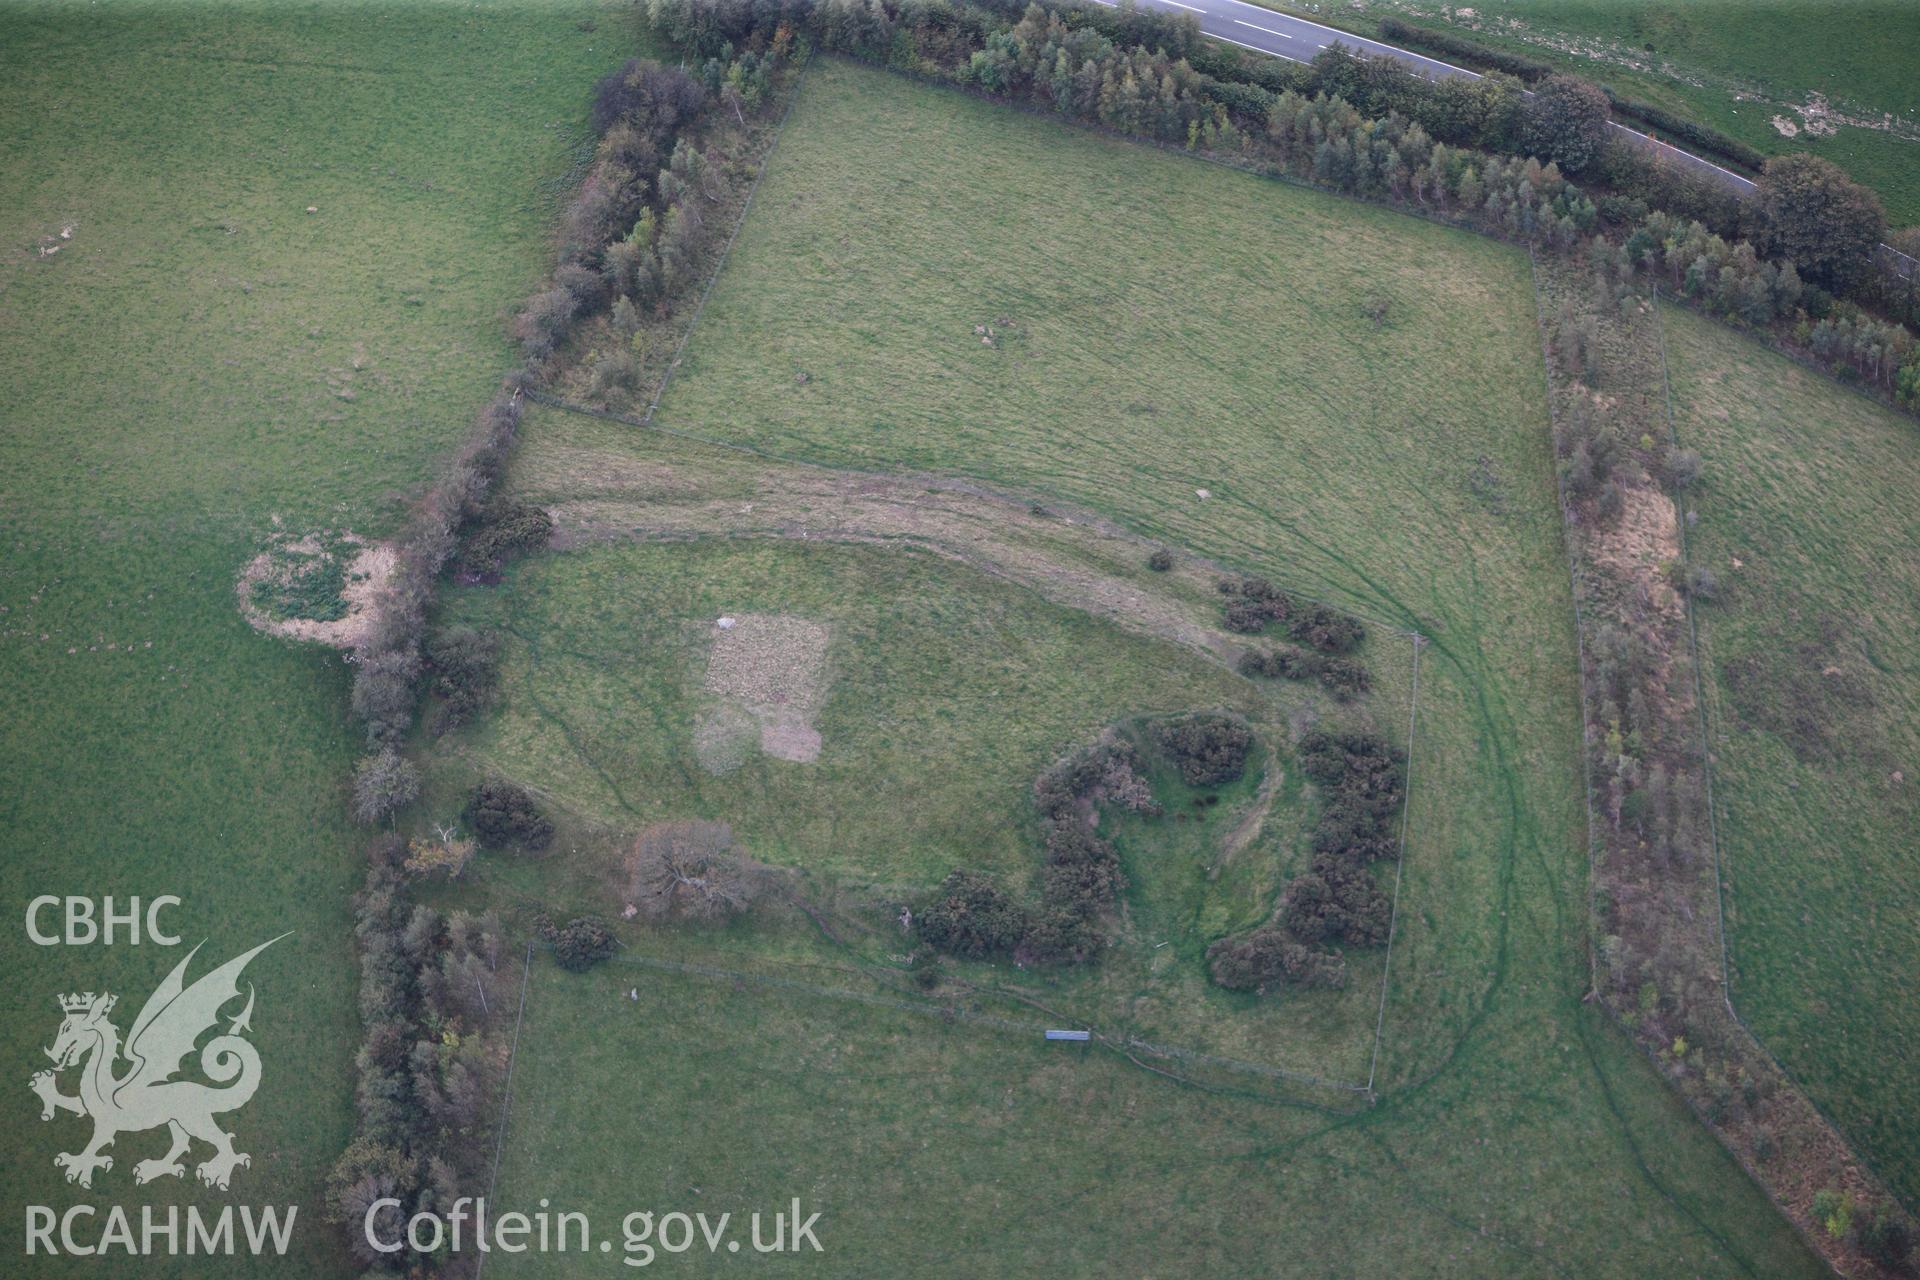 RCAHMW colour oblique photograph of Moel Fodig Hillfort. Taken by Toby Driver on 04/10/2011.